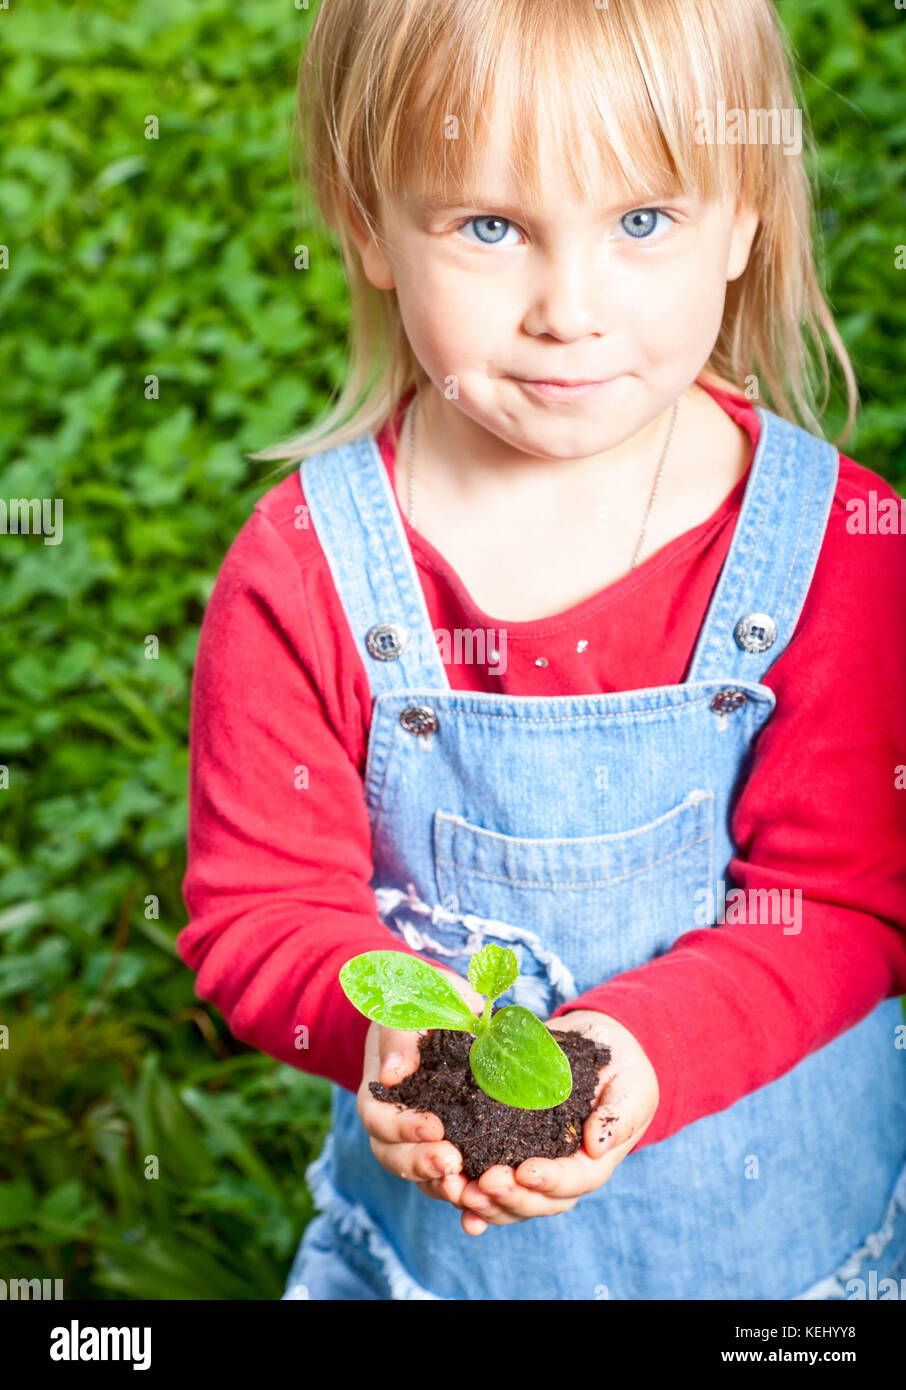 Blonde girl showing seeding with ground, focus on sprout Stock Photo